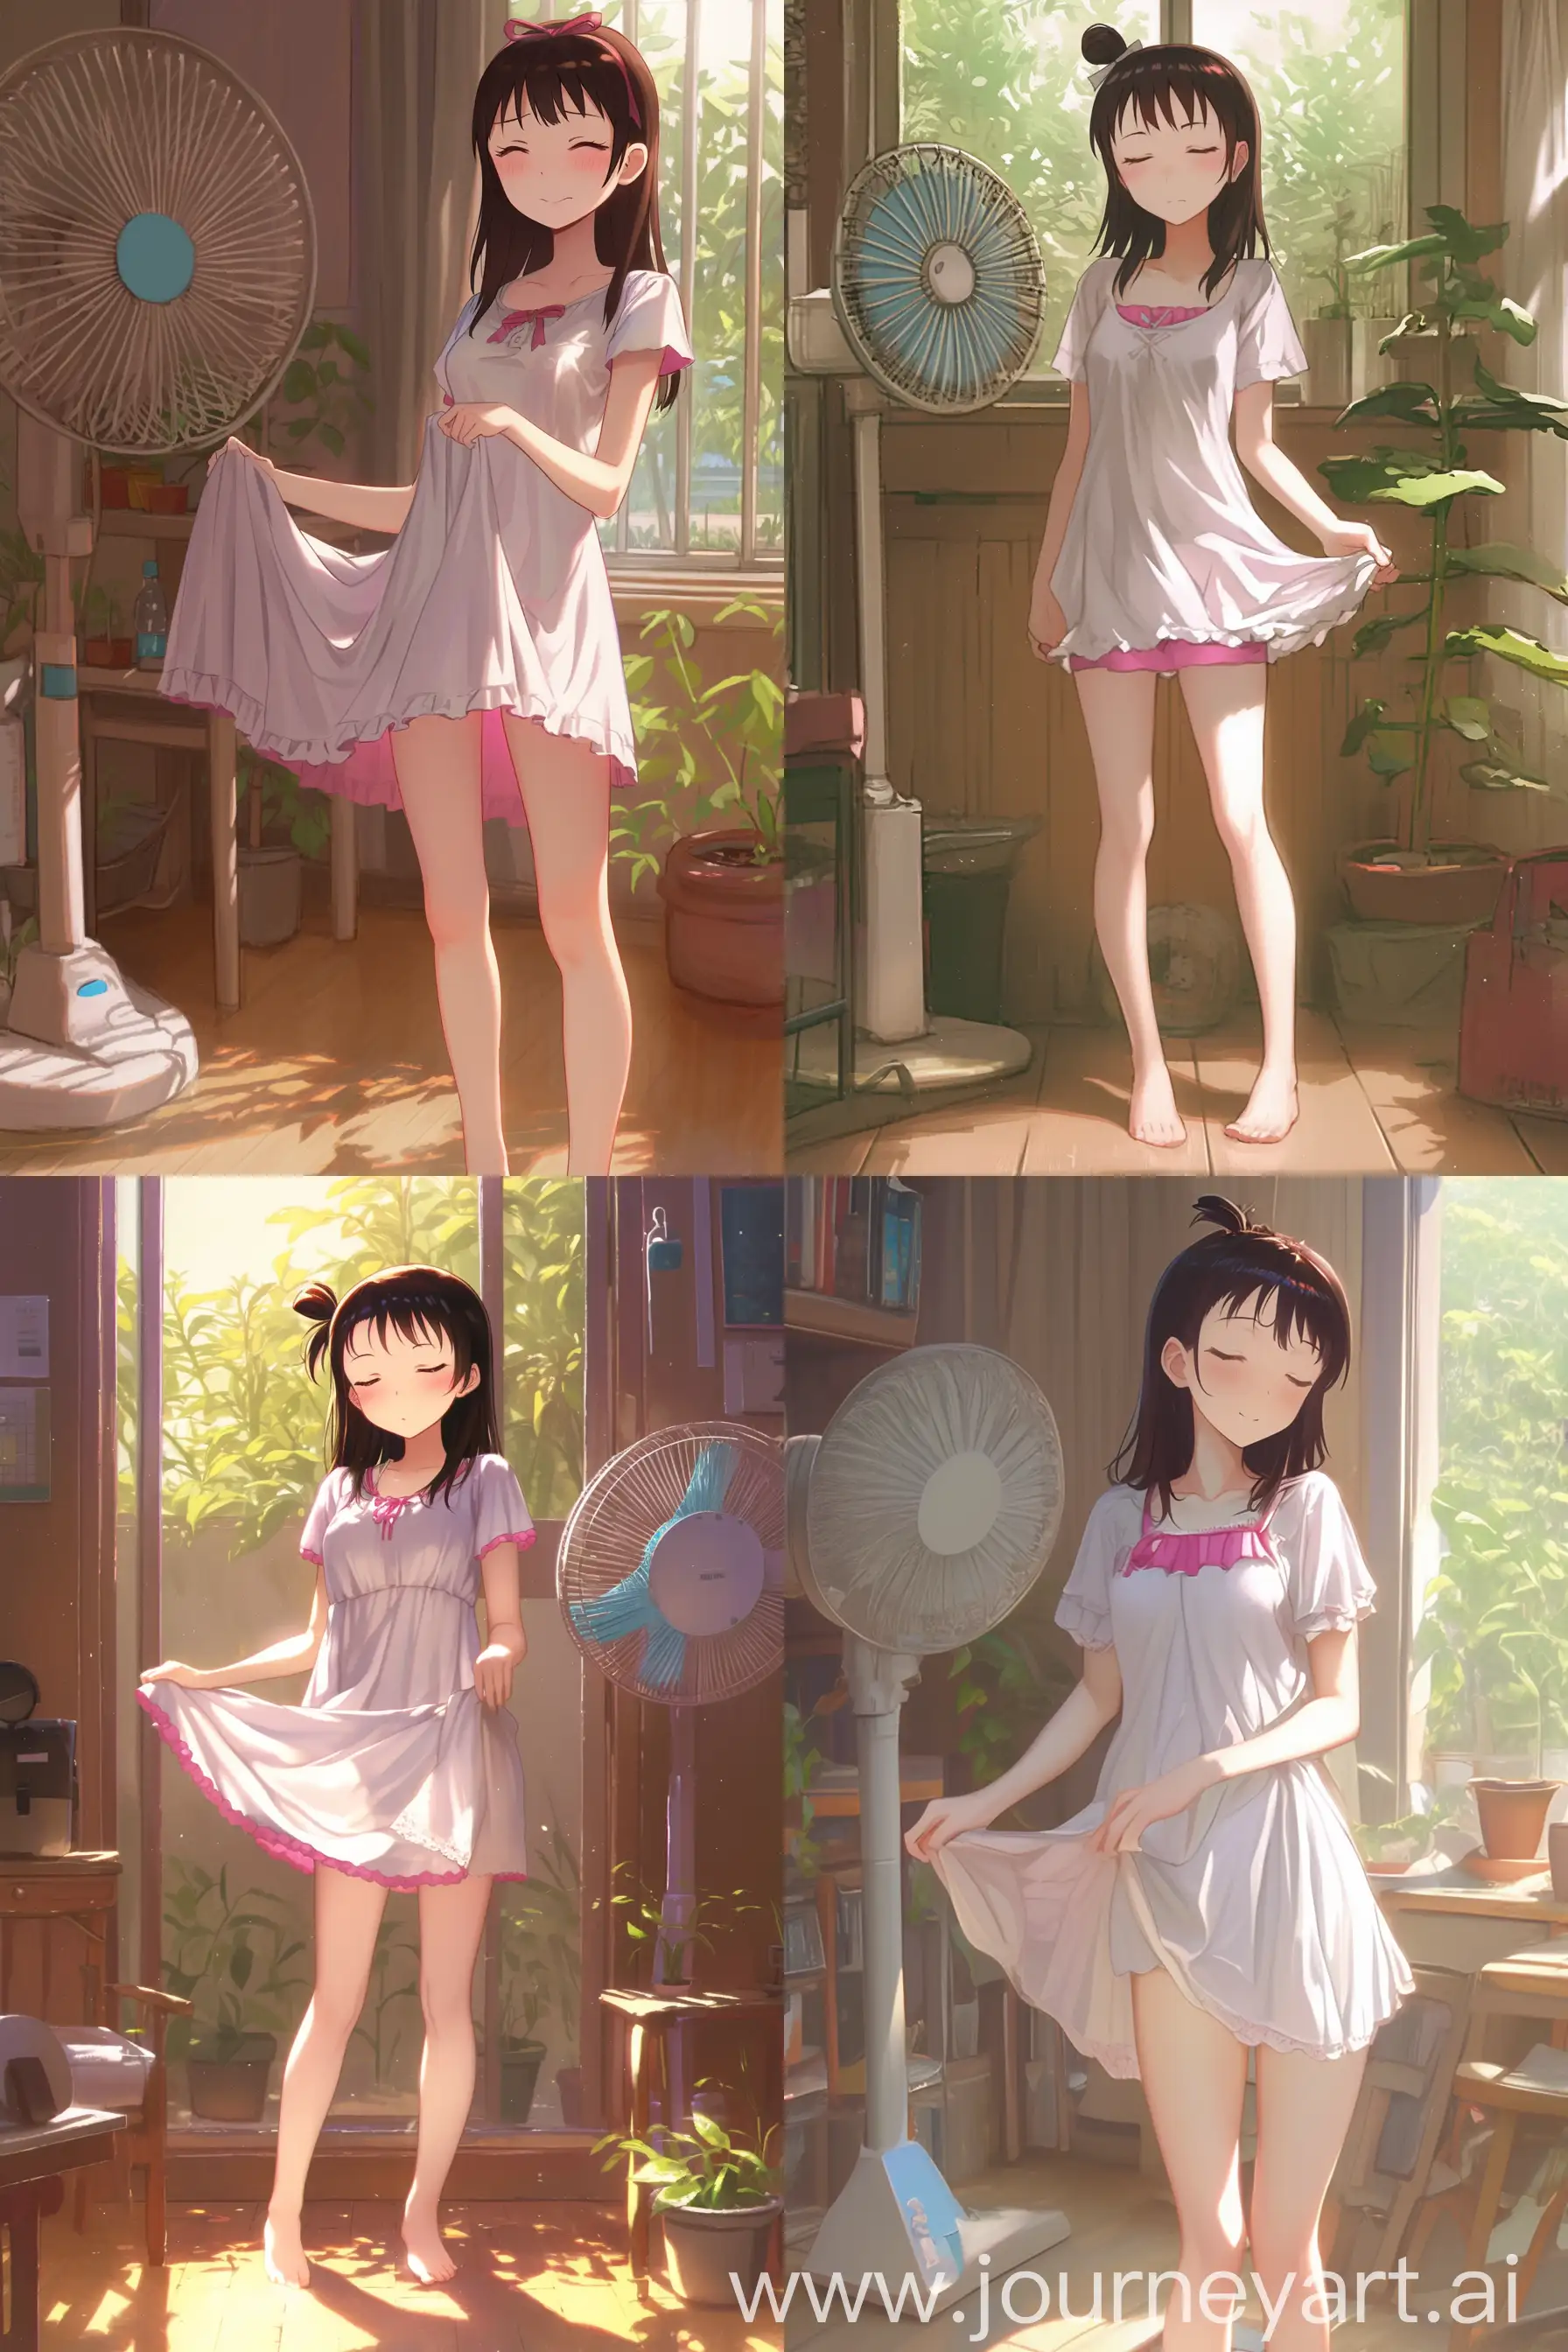 Anime girl standing in front of a fan, wearing a white dress with pink accents, slightly lifting the hem, with a shy expression, detailed background showing a cozy room with plants and various objects, soft lighting, realistic and intricate details, capturing a warm, summertime vibe, high-resolution, inspired by Makoto Shinkai's style --cref https://cdn.discordapp.com/attachments/1240202563924529203/1255377811036835951/c1d2c2db65ec7376ba6ca041db4813fa.jpg?ex=667ce931&is=667b97b1&hm=81f2f9a26ceb4c01430a0f6889e4b5bdbb0f0d24073b5deed6d66502b5ed9e4f& --cw 100 --ar 2:3 --s 500 --niji 6